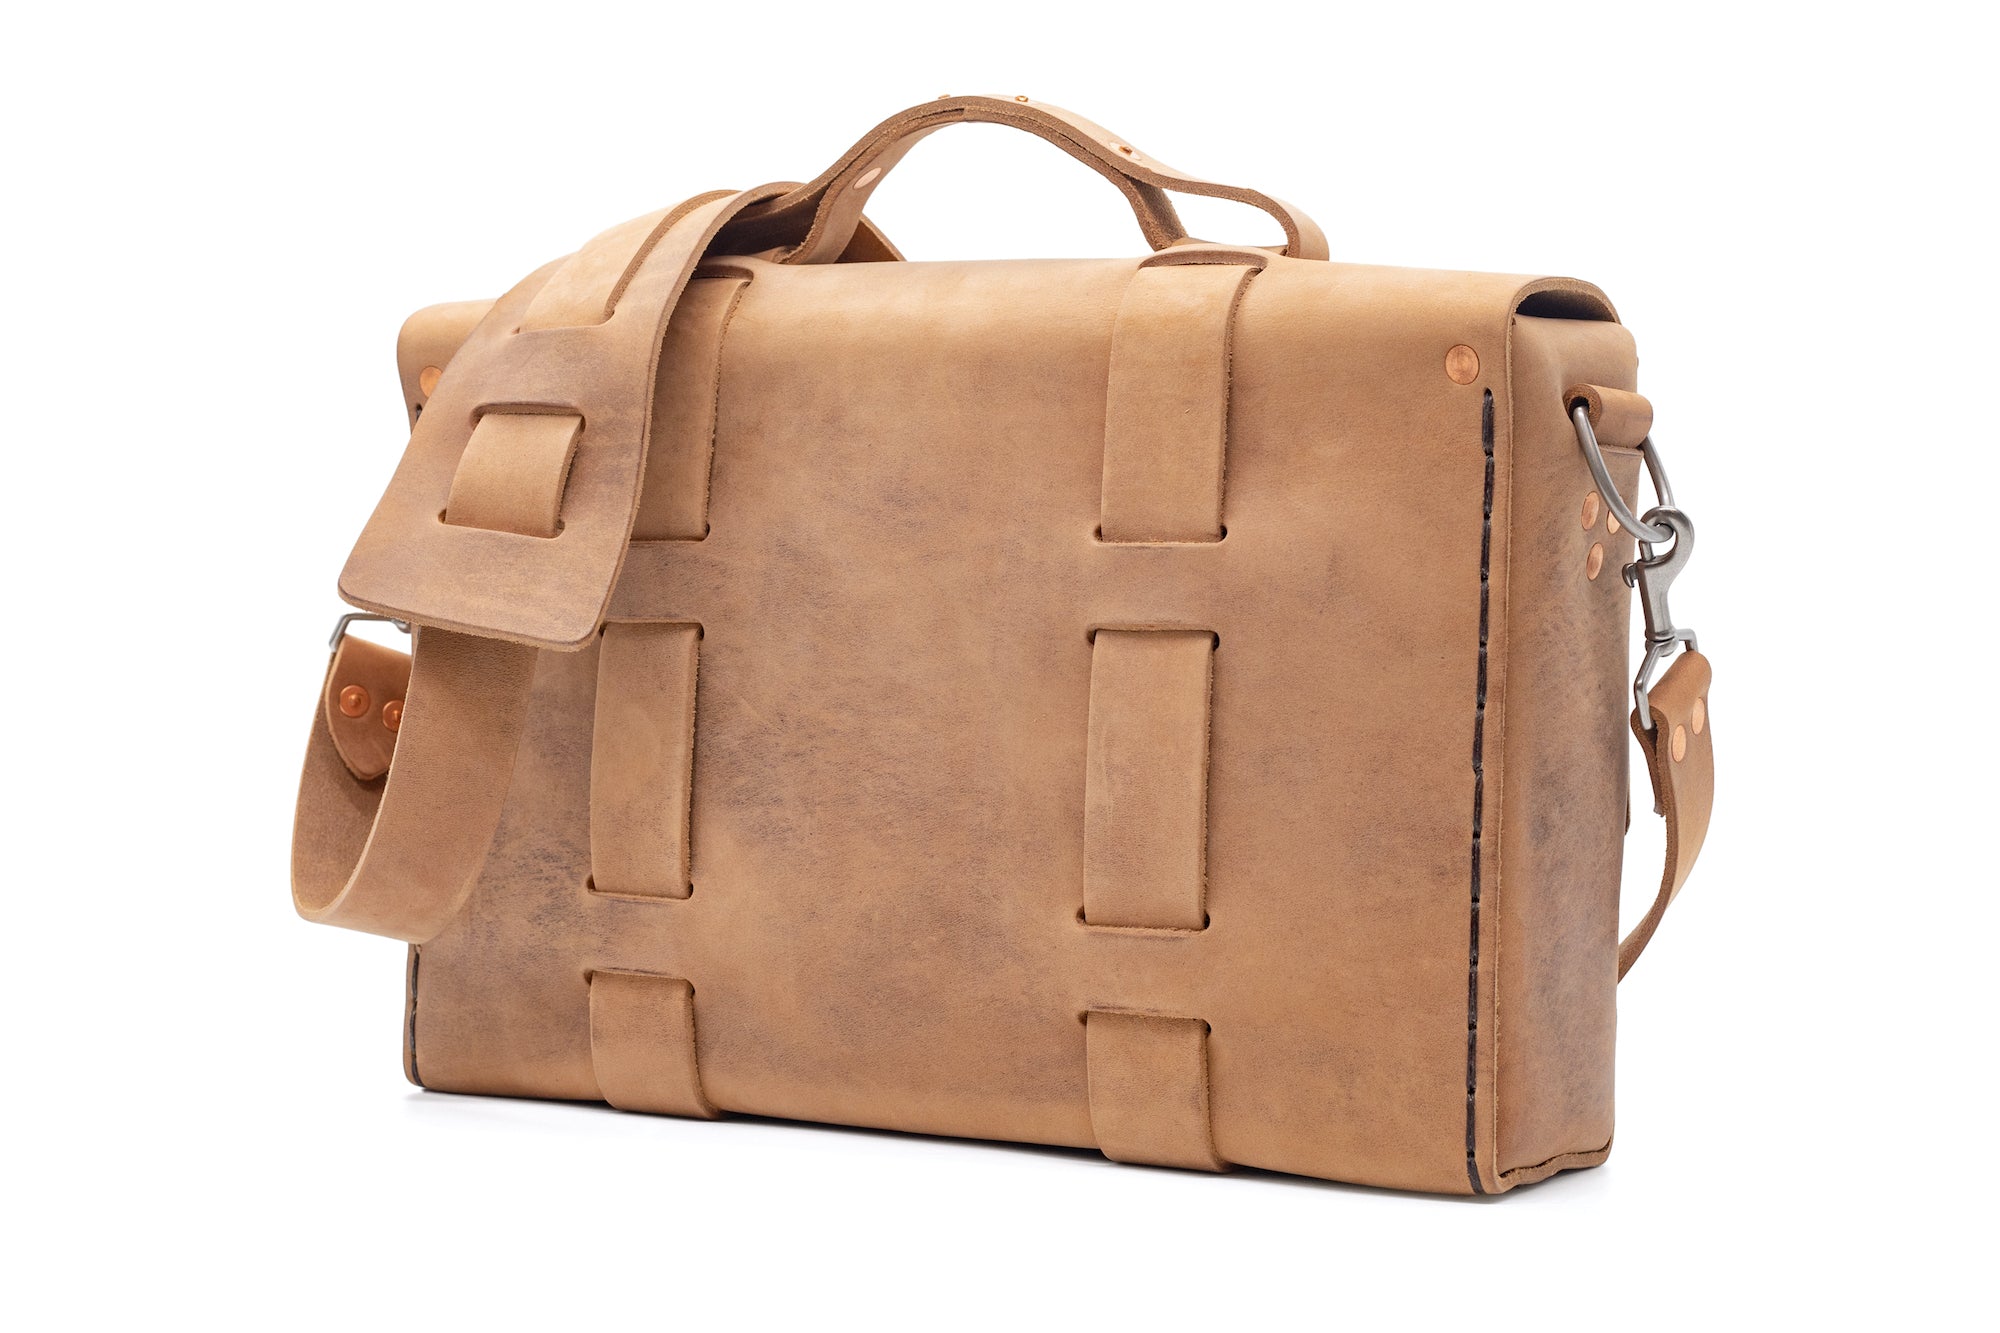 Limited Edition No. 4313 - Minimalist Standard Leather Satchel in Pecan Cream - ONLY 1 MADE